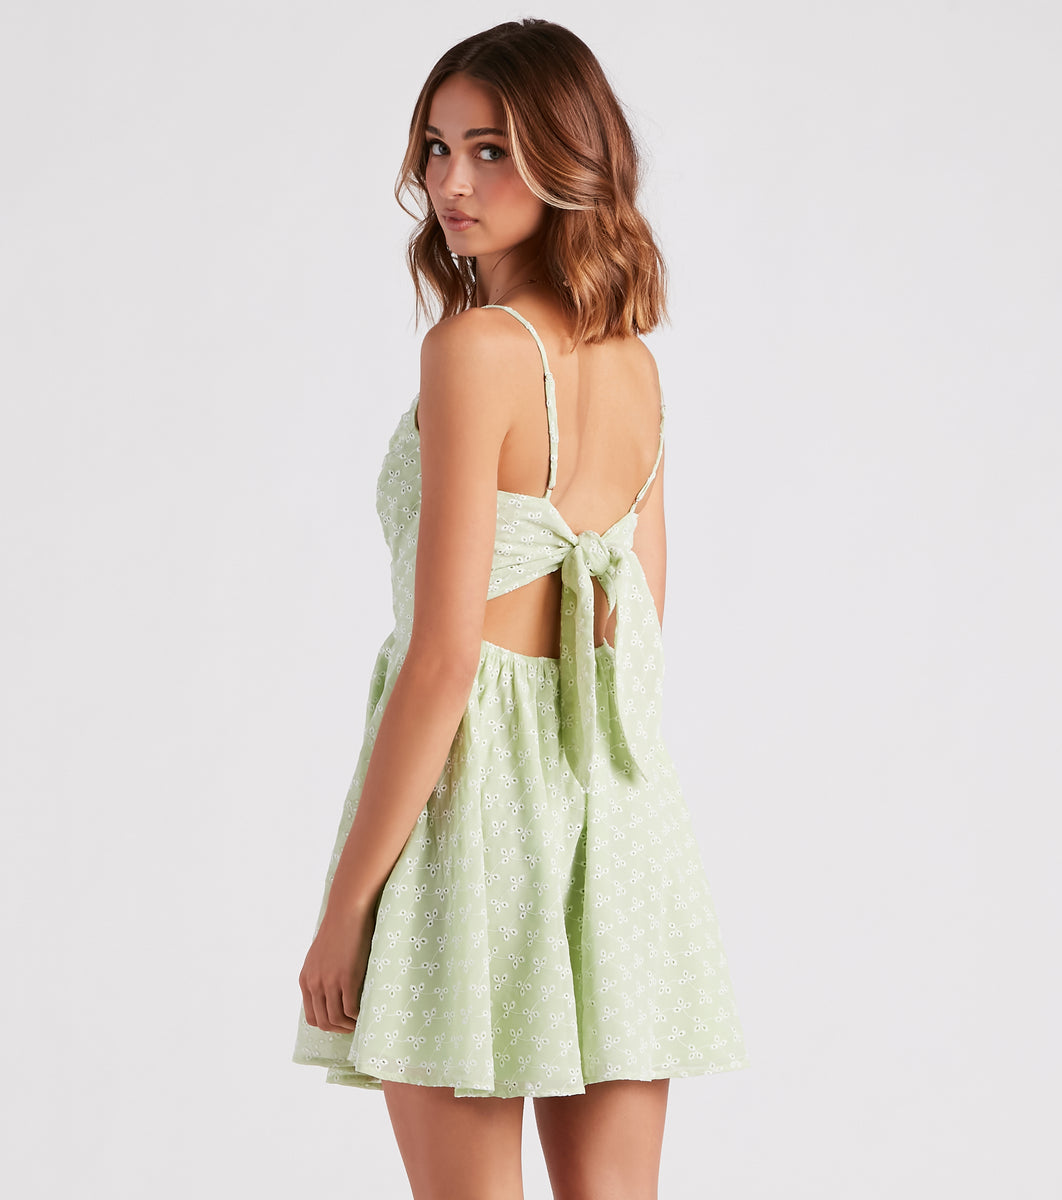 Sway With Me Eyelet Lace Skater Dress & Windsor